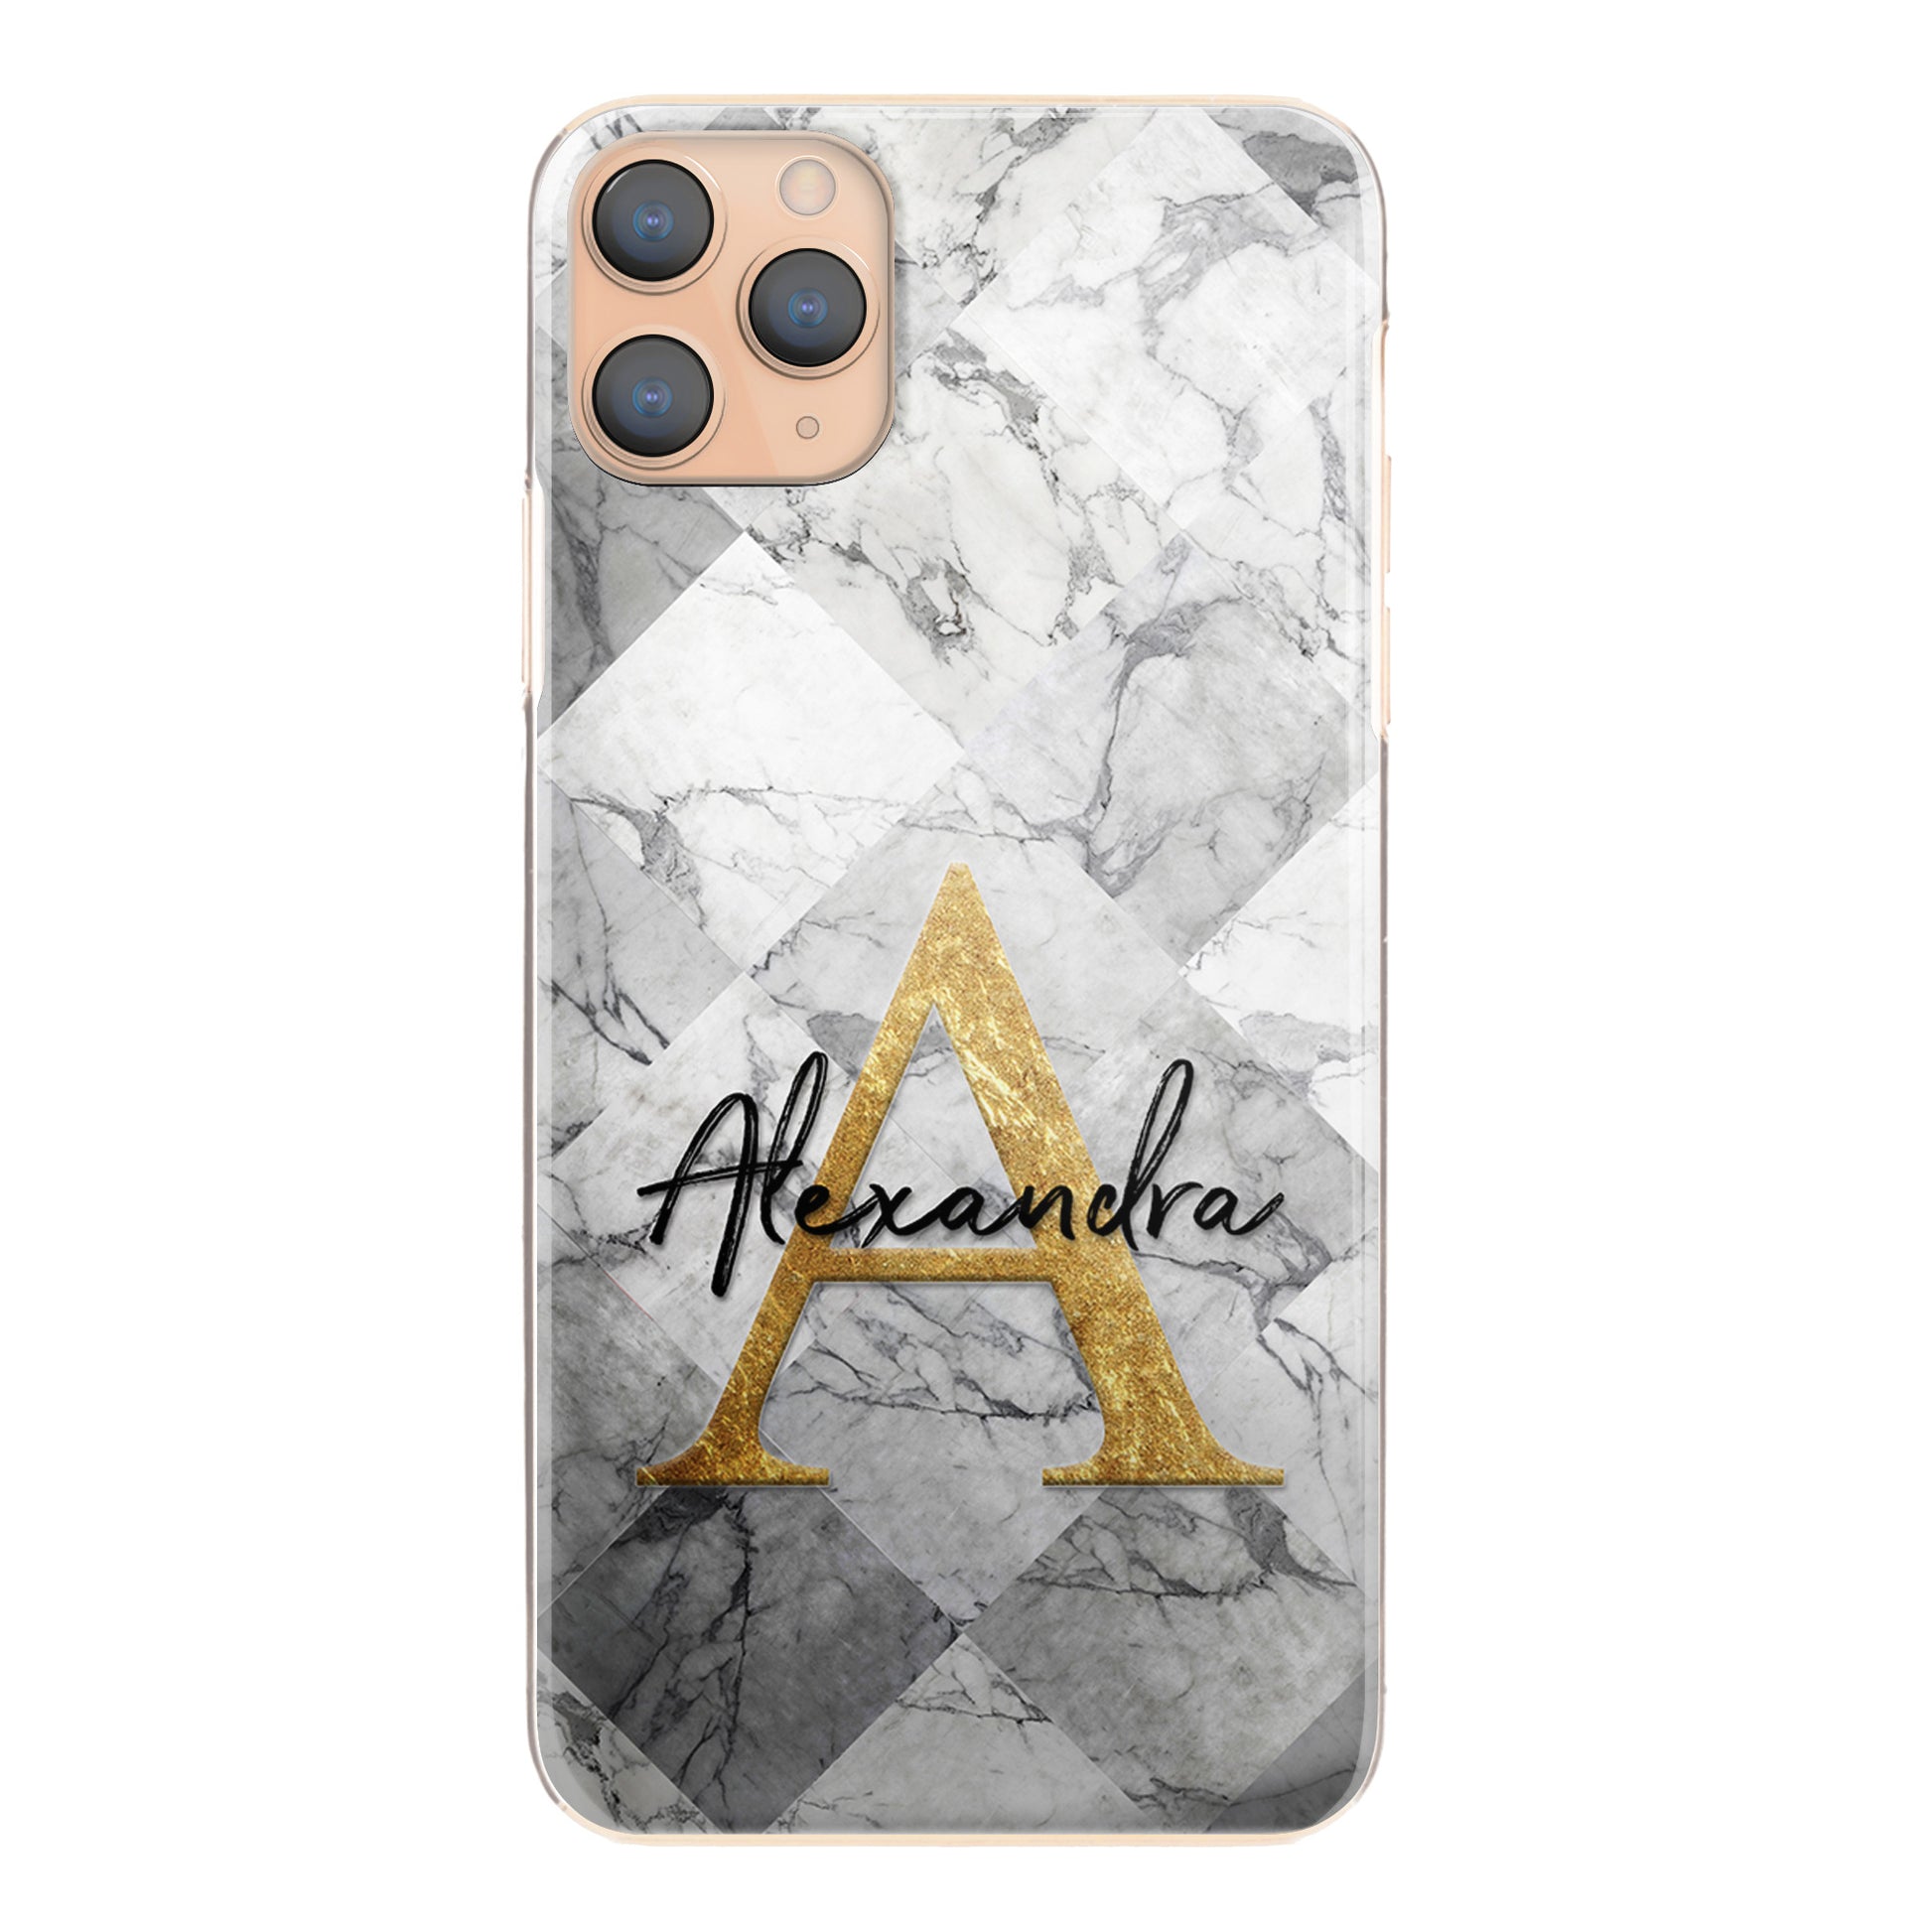 Personalised One Phone Hard Case with Gold Monogram and Stylish Text on Patterned Grey Marble